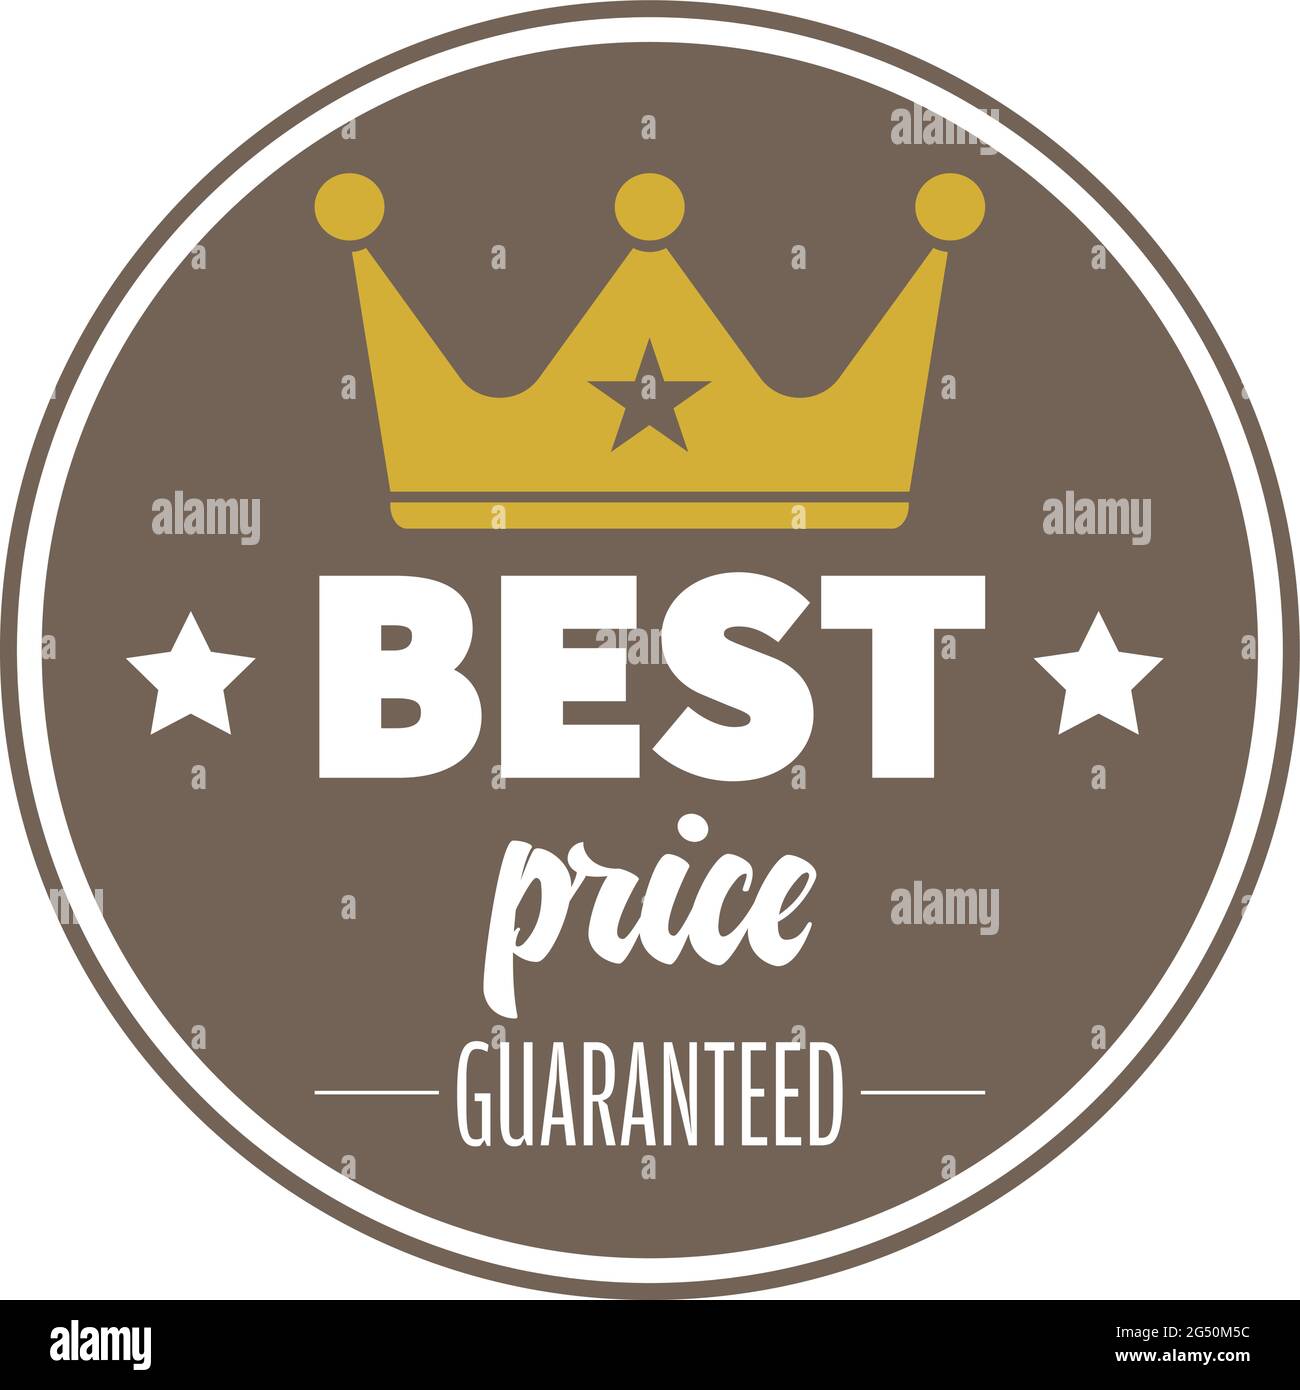 BEST PRICE GUARANTEED label or badge with golden crown symbol, vector illustration Stock Vector